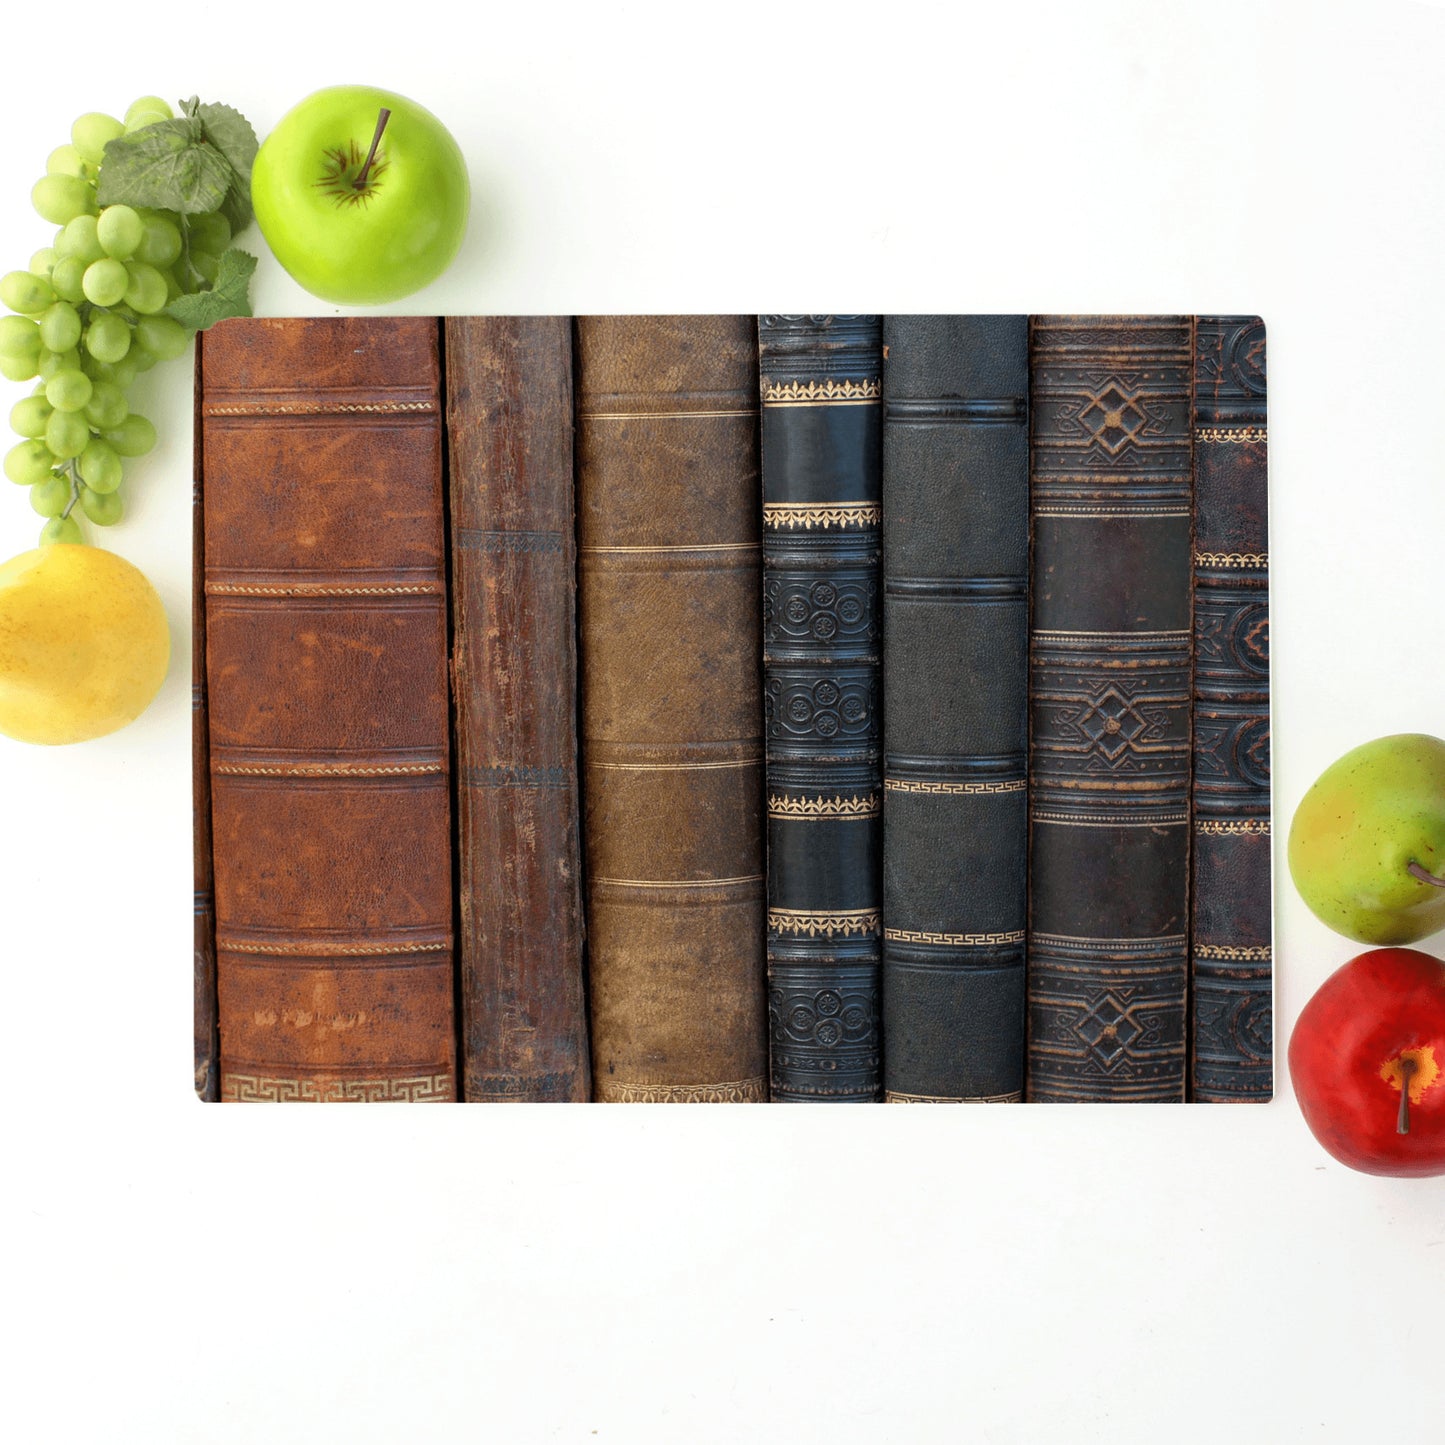 Vintage Books printed on a glass cutting board for gift